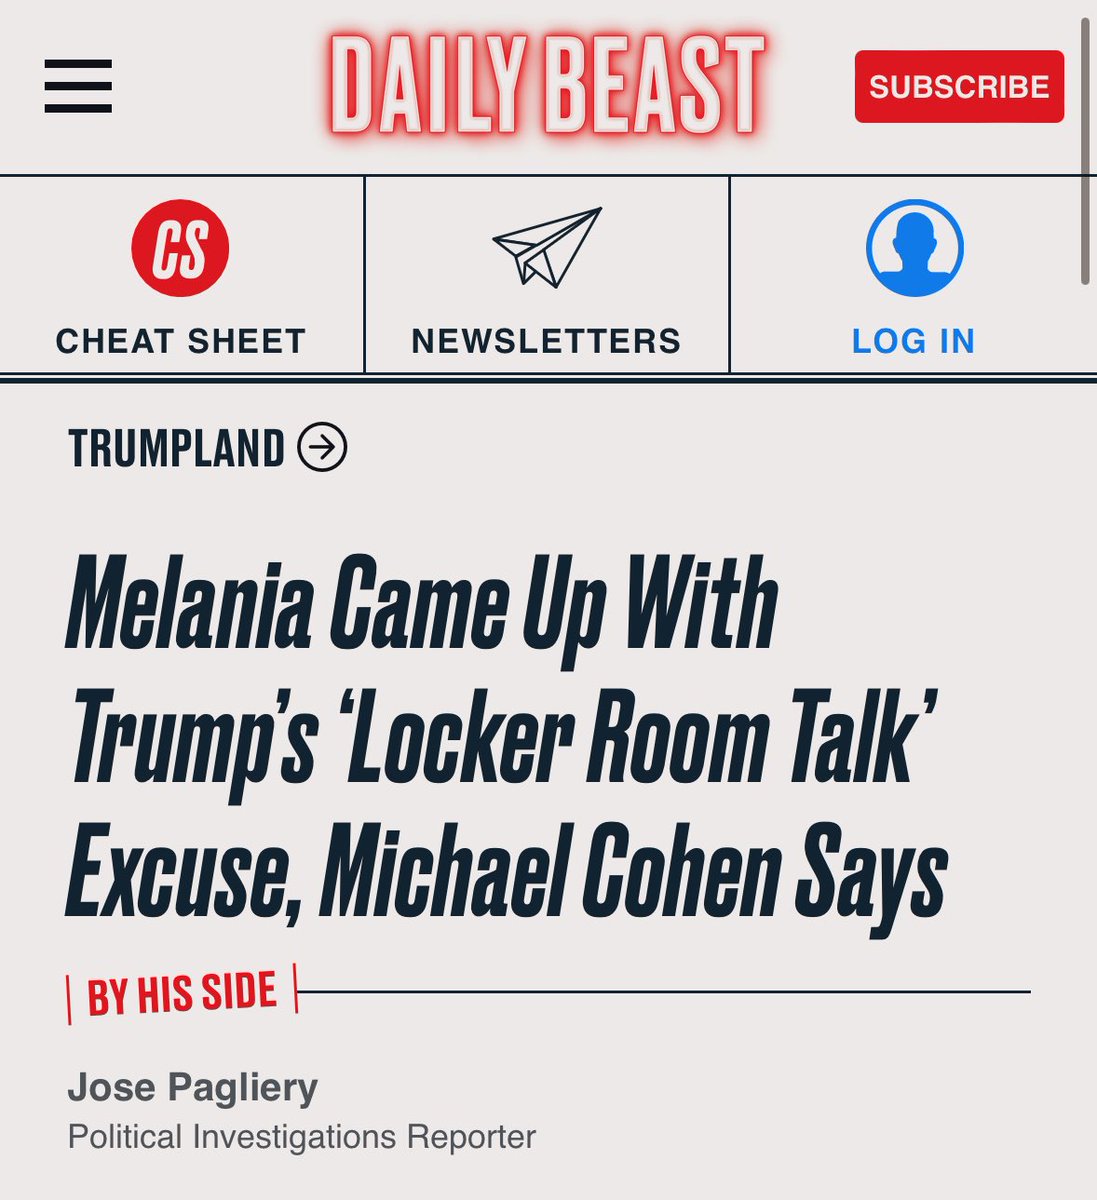 Michael Cohen testified Melania is the one who defended Trump’s sexual assault brag as “locker room” banter. A reminder that she is just as cruel and corrupt as the rest of them.